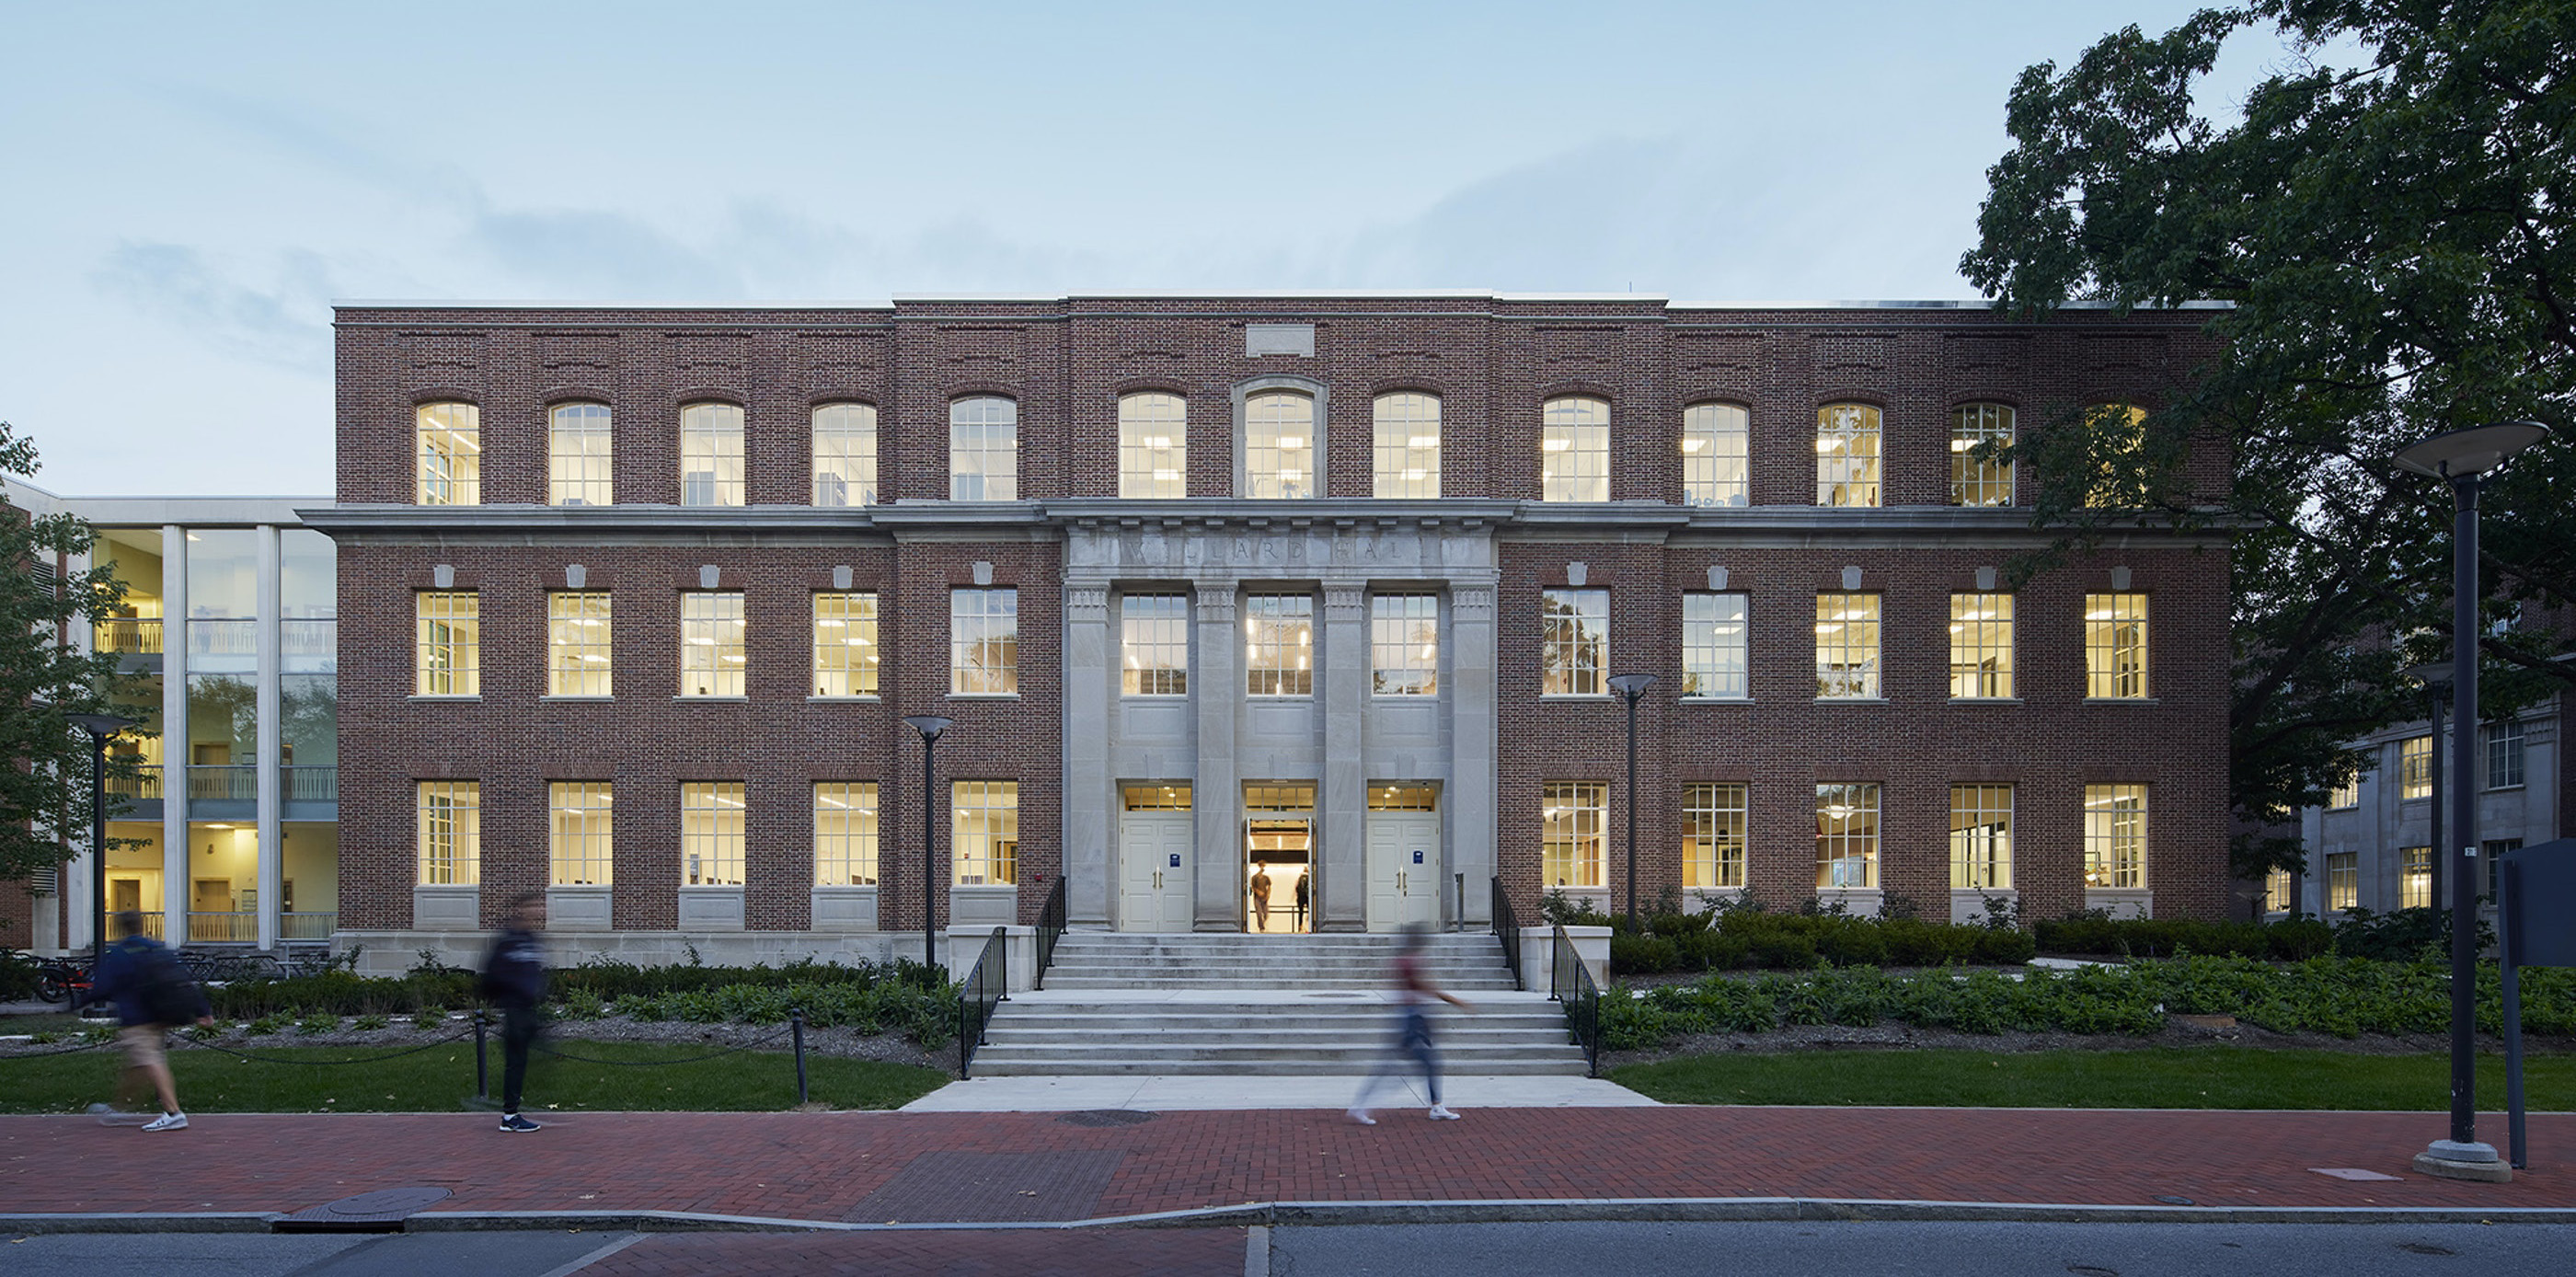 A subtle background photo of the front of Willard Building, a several story brick classroom building with four columns at the ntrance. Green lawn and bushes in the foreground.